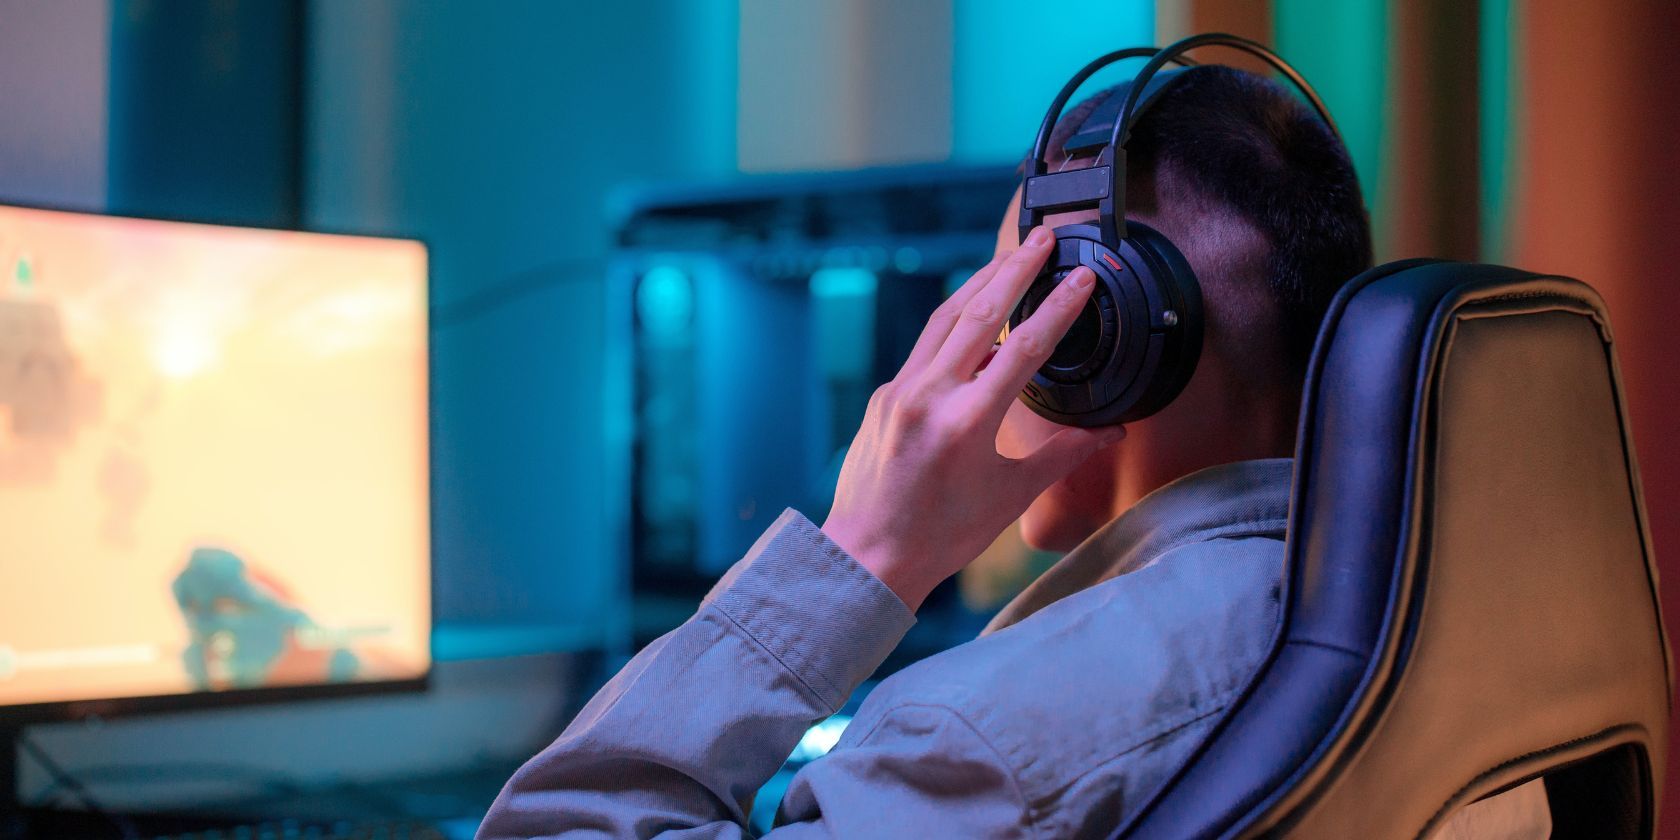 Person playing video game with voice chat through headphones